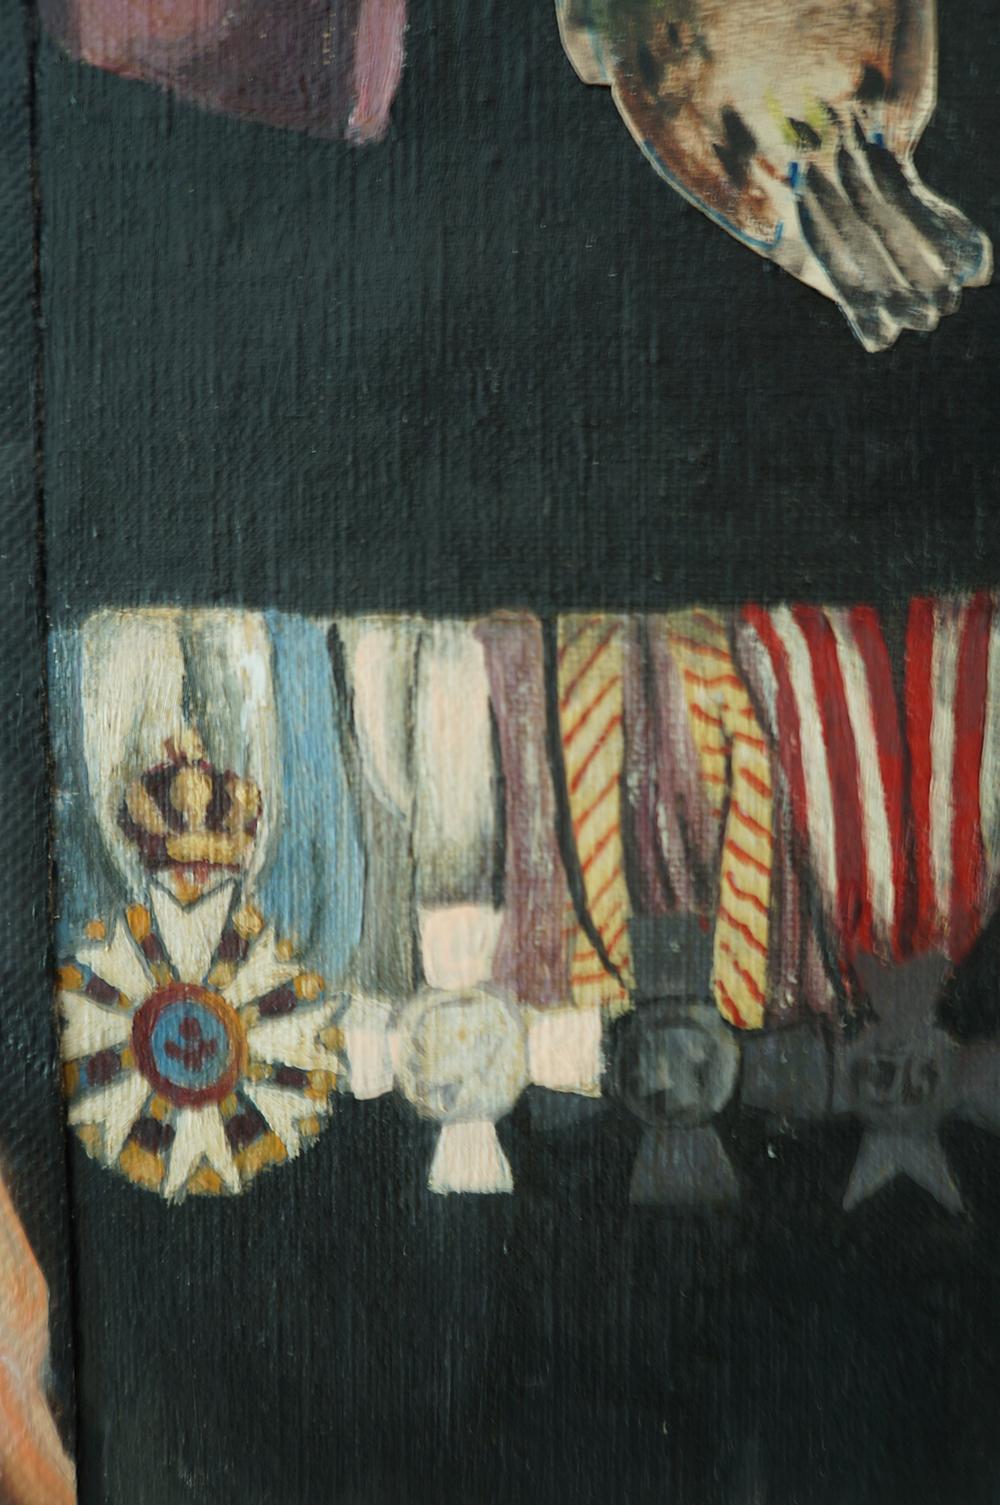 John Baker’s “Lifelong Priorities of a Priest” is an acrylic painting on canvas with collage 20 inches by 16 inches in maroon, flesh tones and blacks. Bedecked with official awards from his superiors, but also wearing a bird badge of inscrutable